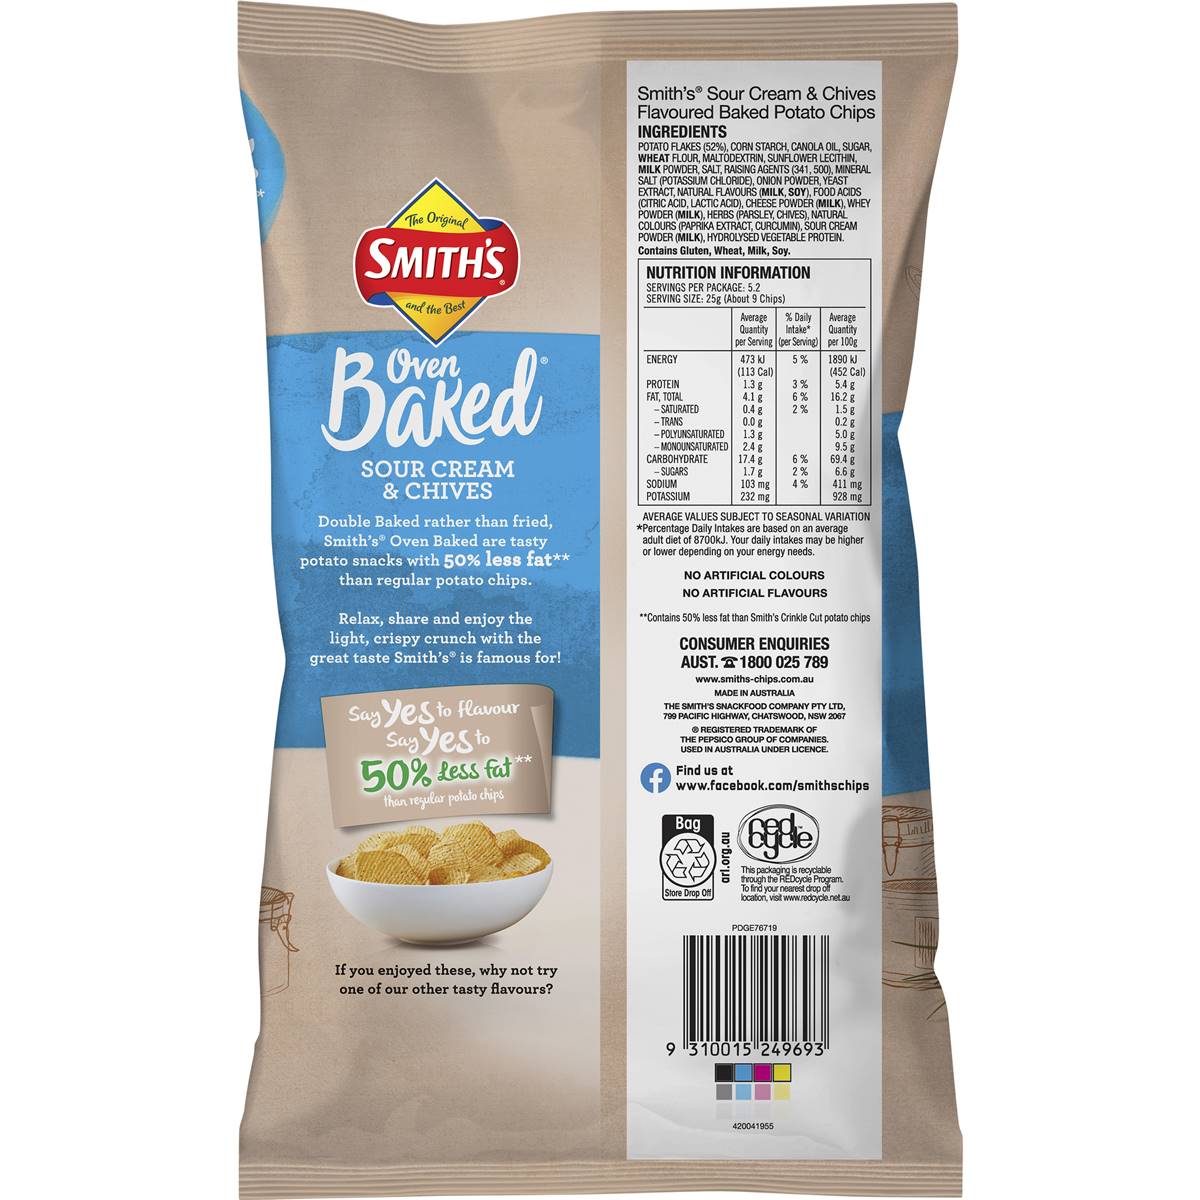 Smith's Oven Baked Sour Cream & Chives 130g